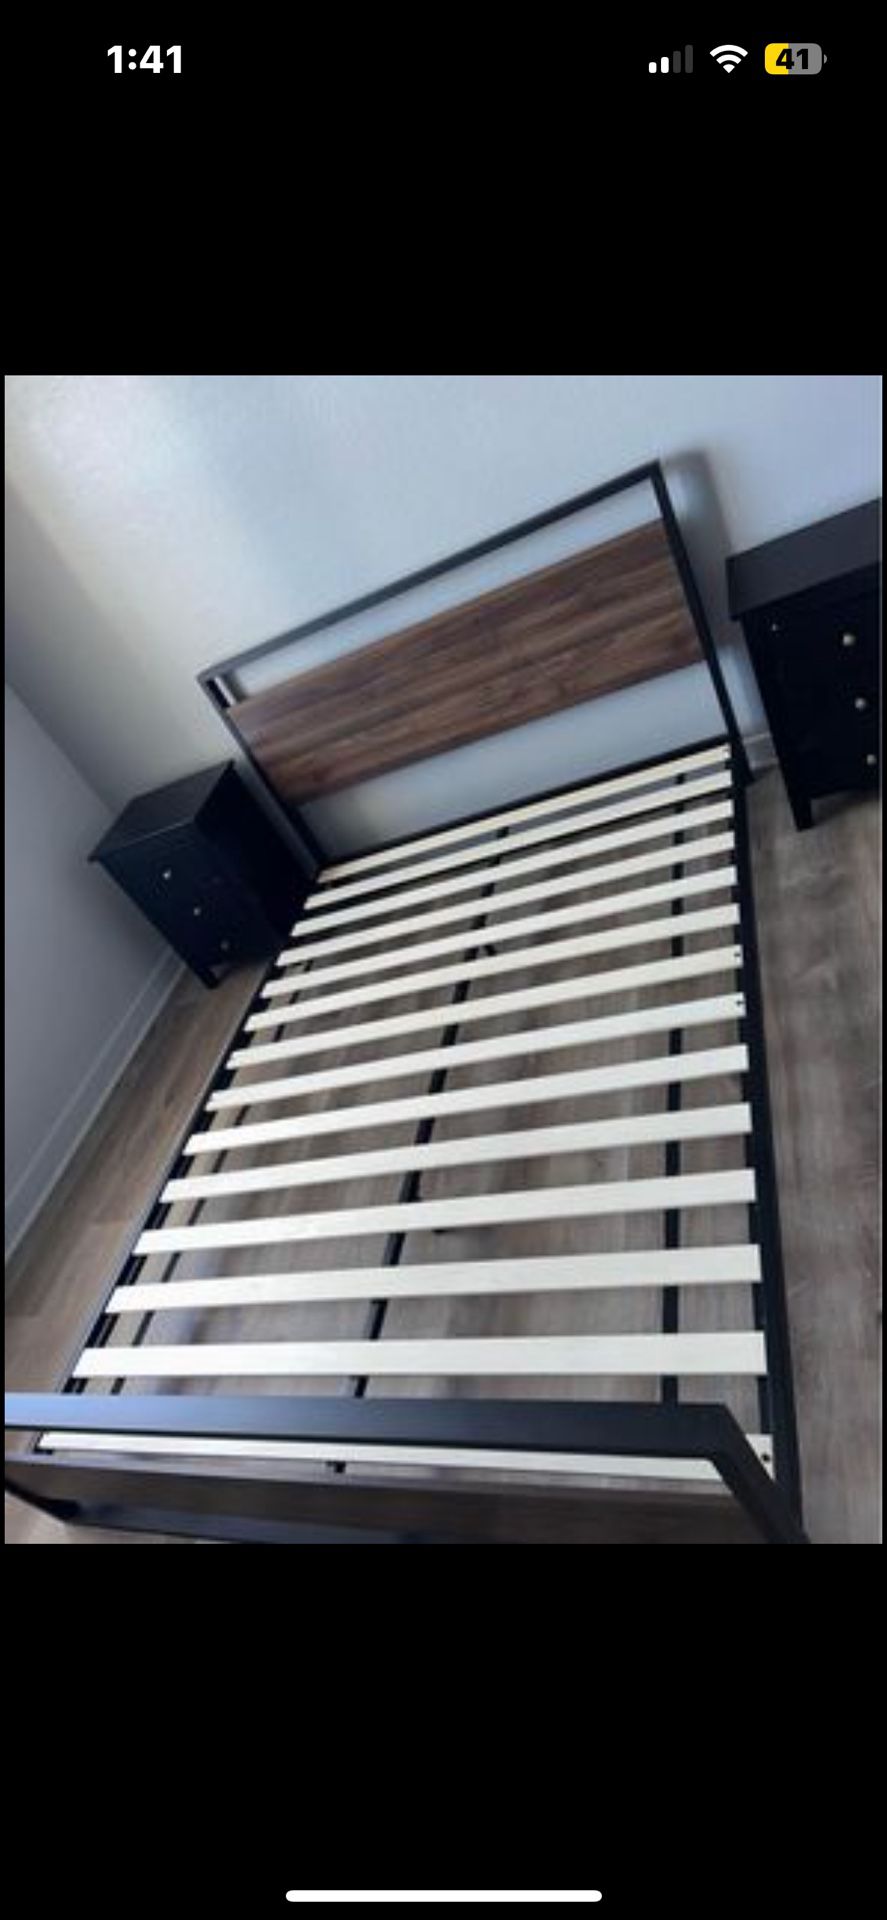 Full Size Bed Frame (with Nightstands)